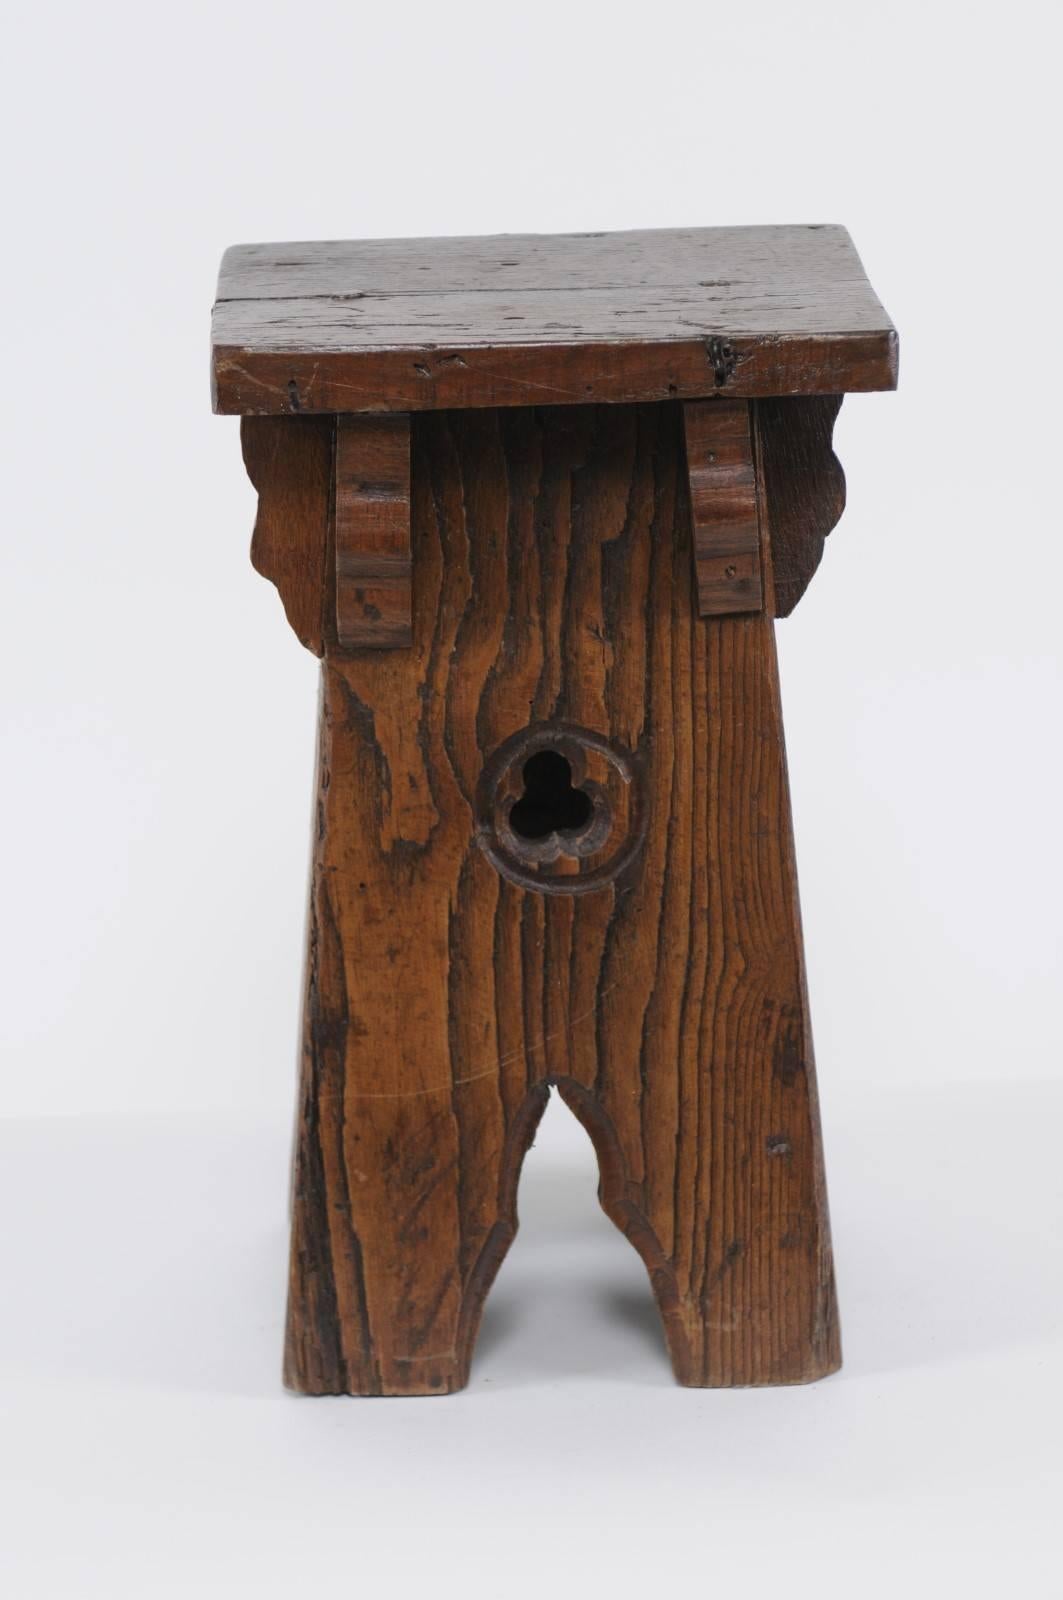 Wood Spanish Oak Stool with Trefoil Motifs and Brackets from the Early 20th Century